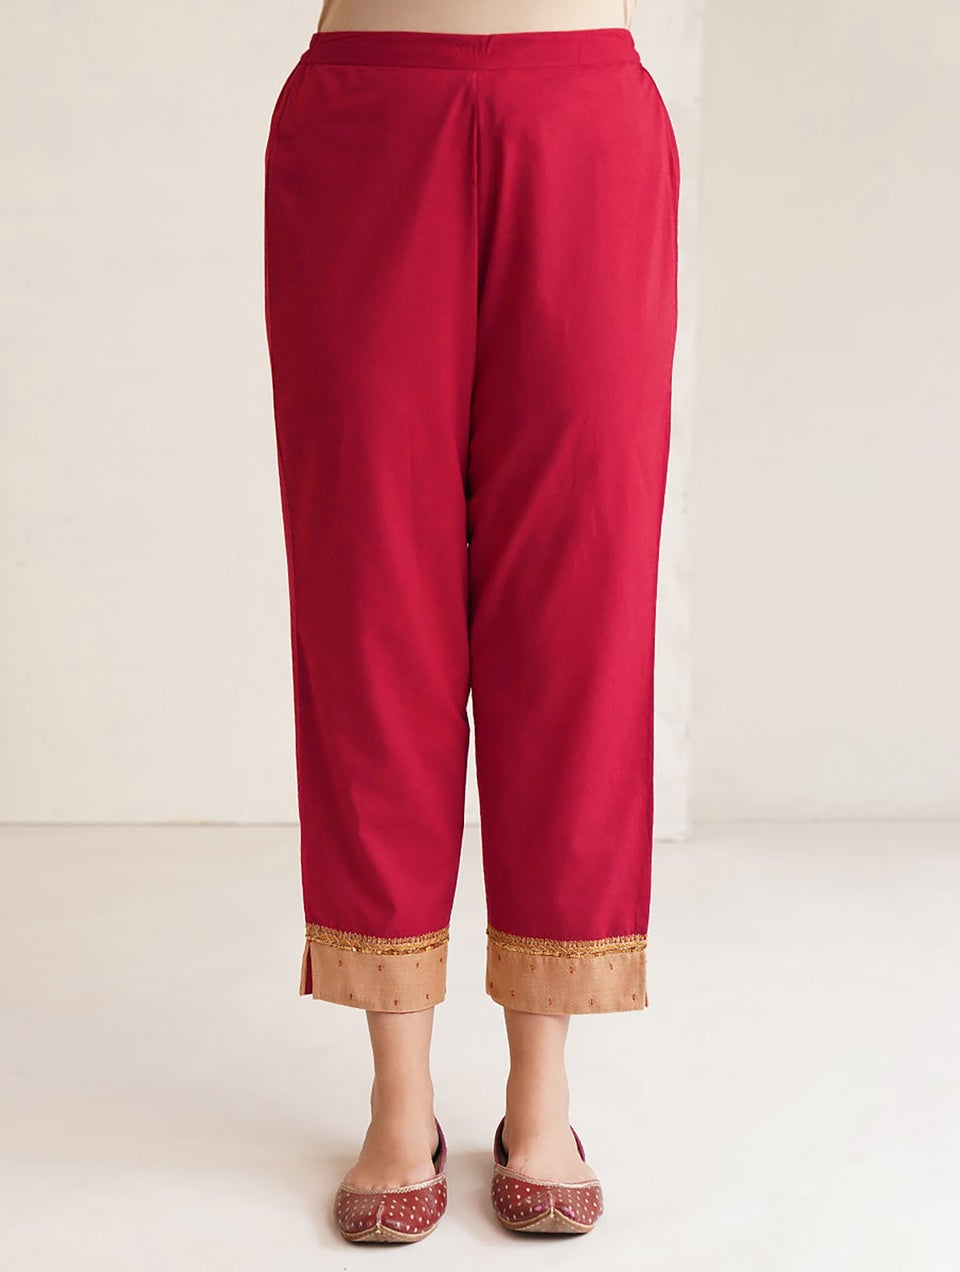 Women Red Hand Embroidered Elasticated Waist Cotton Pants - XS